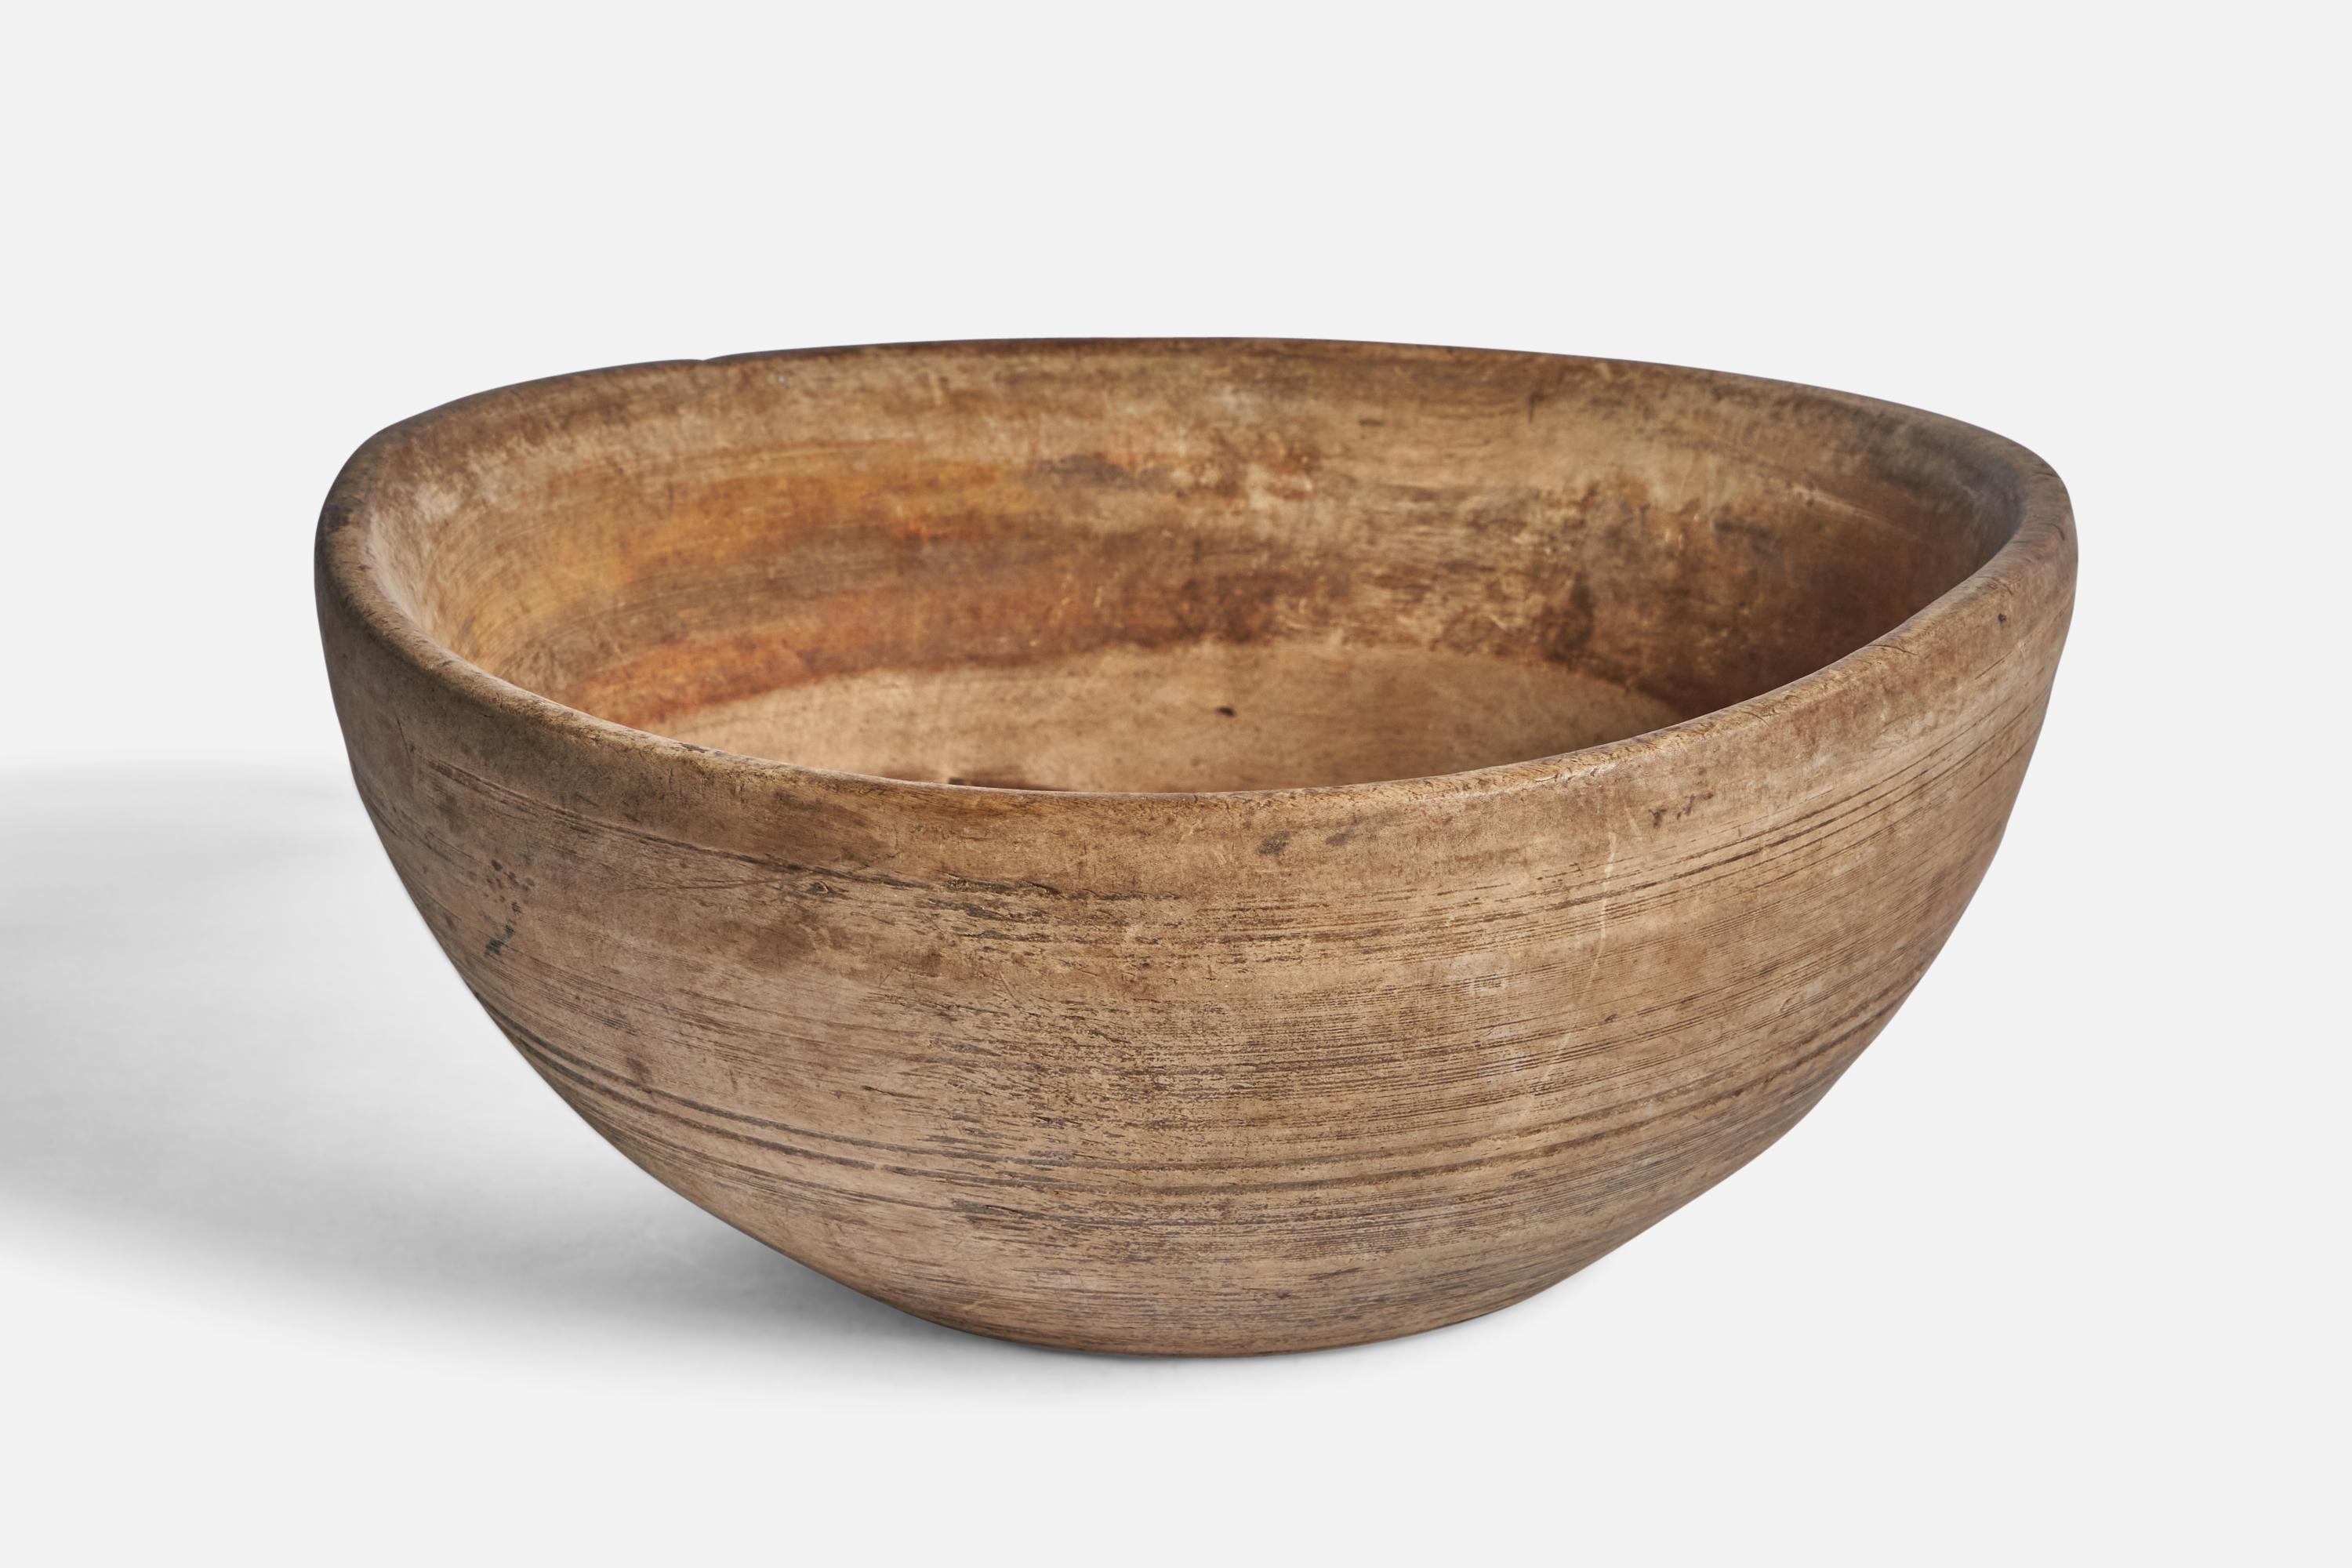 A wood bowl produced in Sweden, 19th century